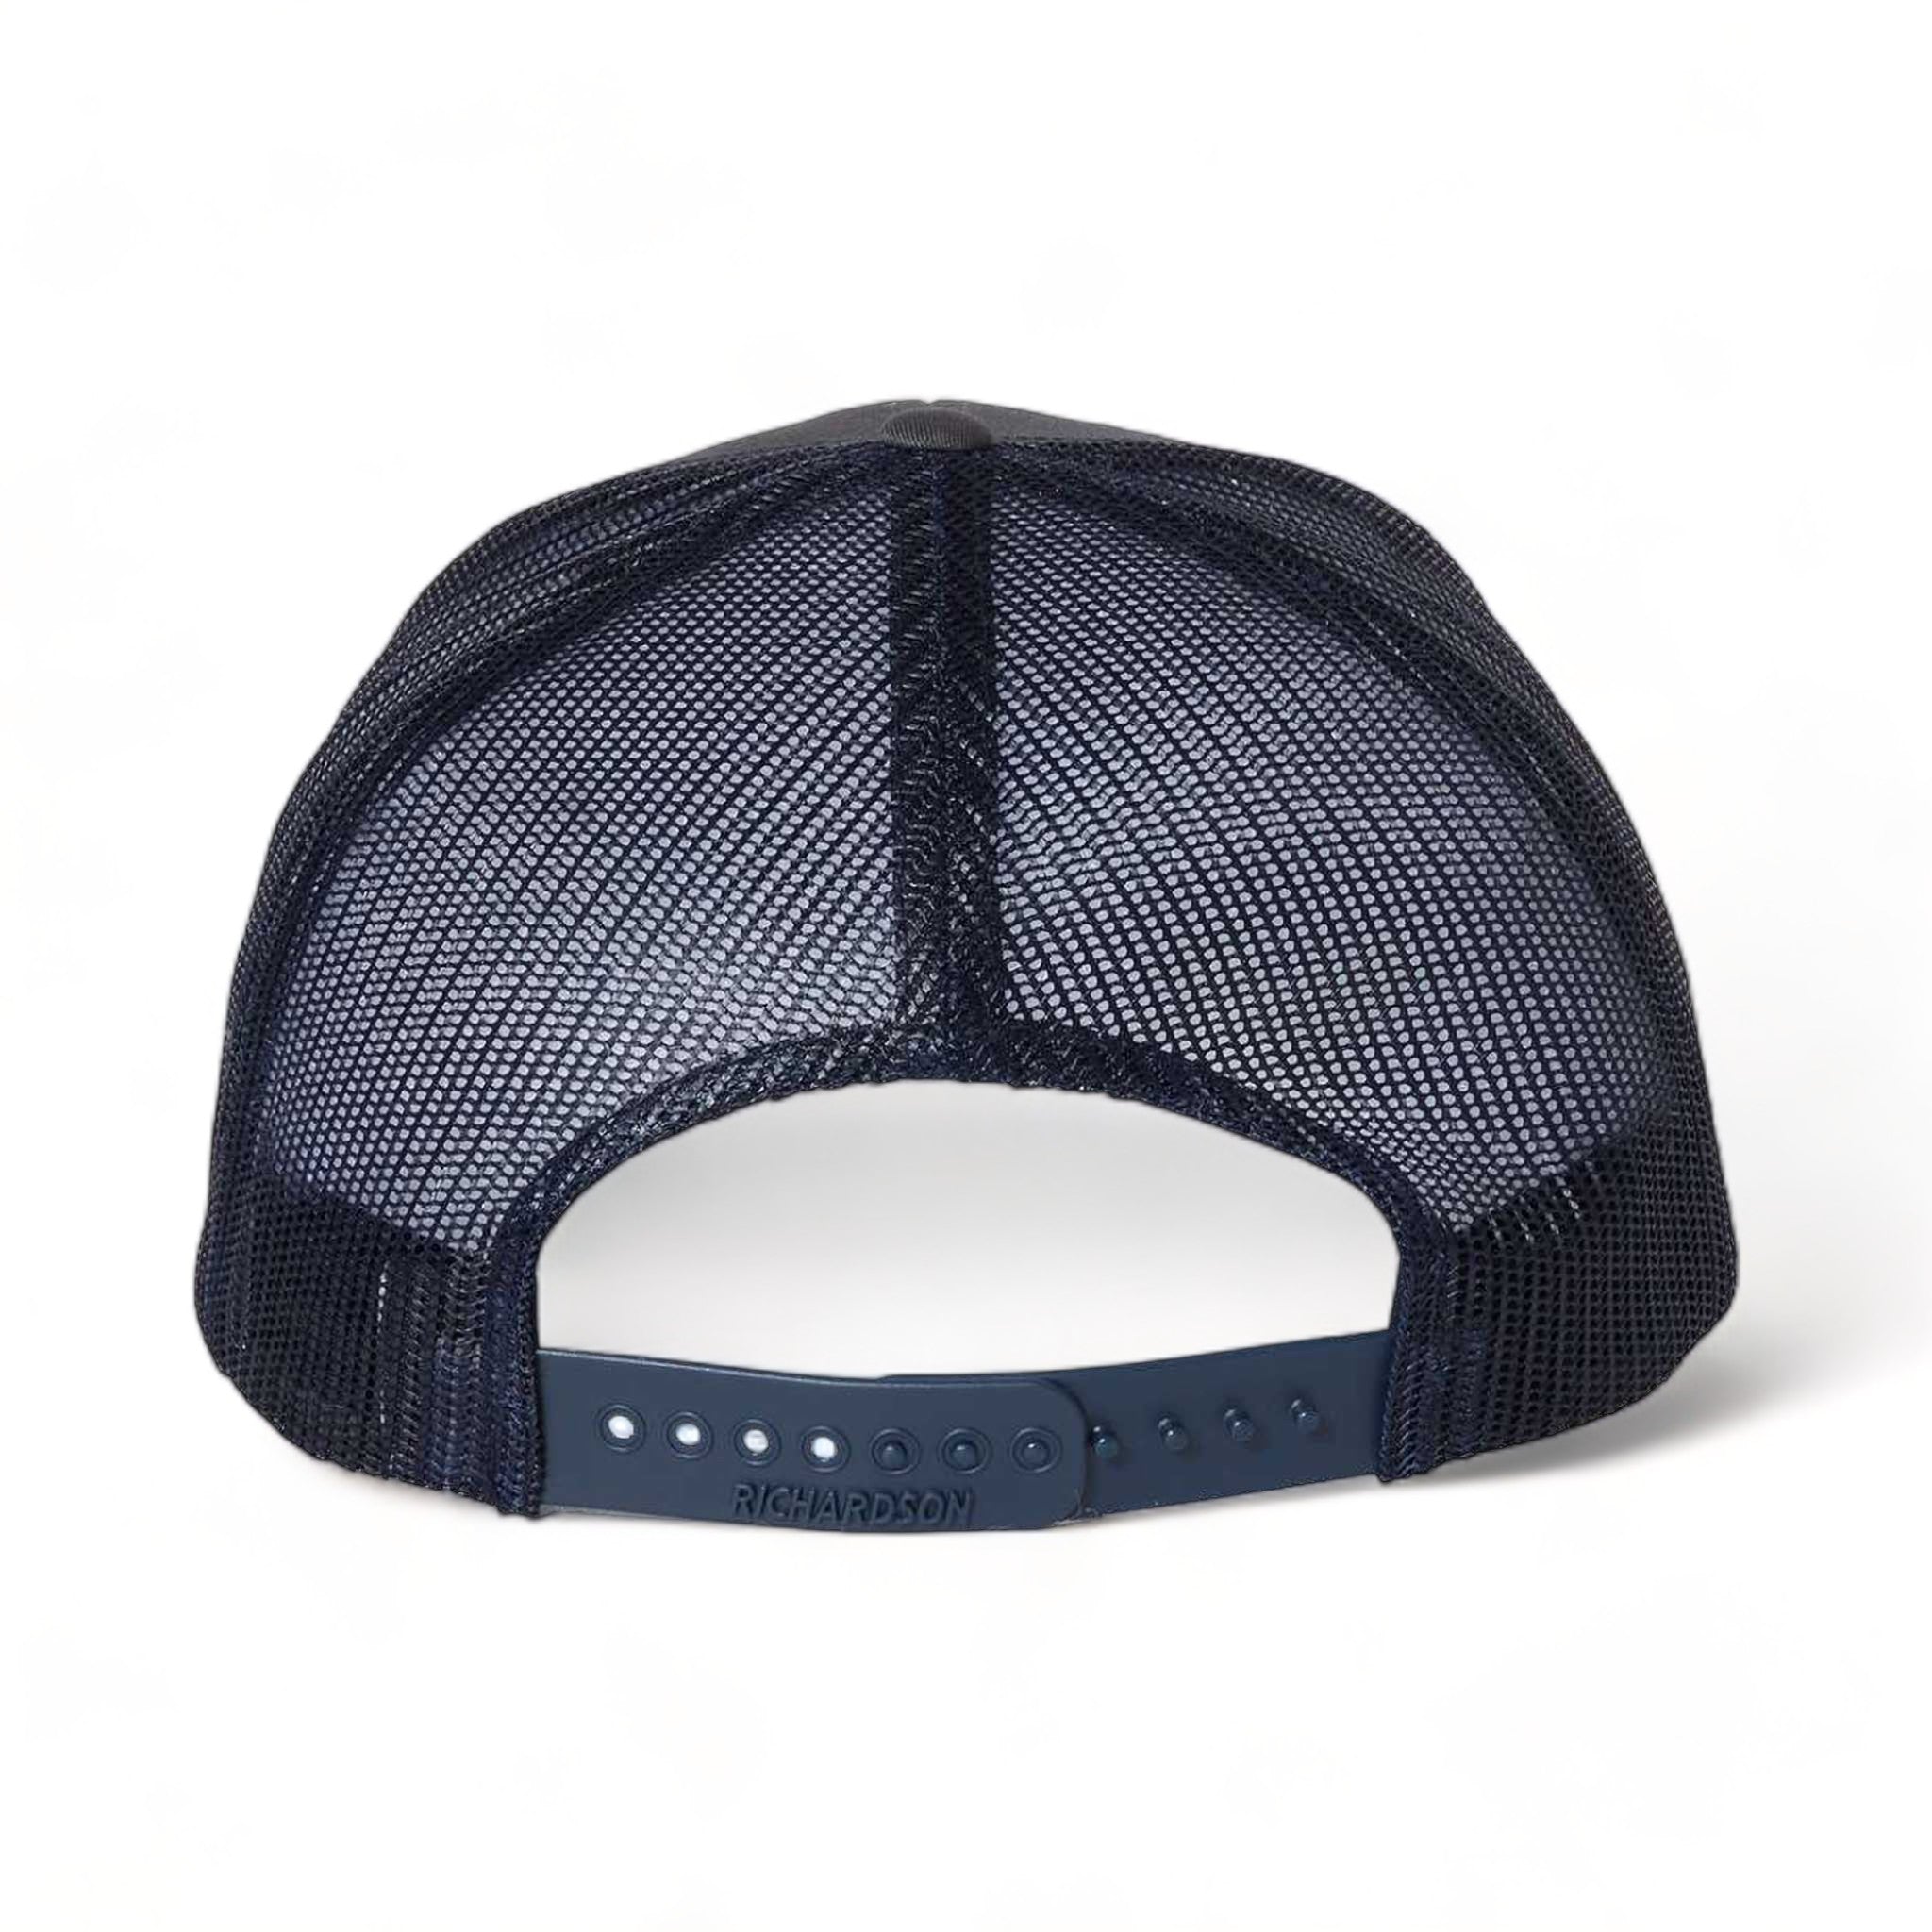 Back view of Richardson 112 custom hat in charcoal and navy